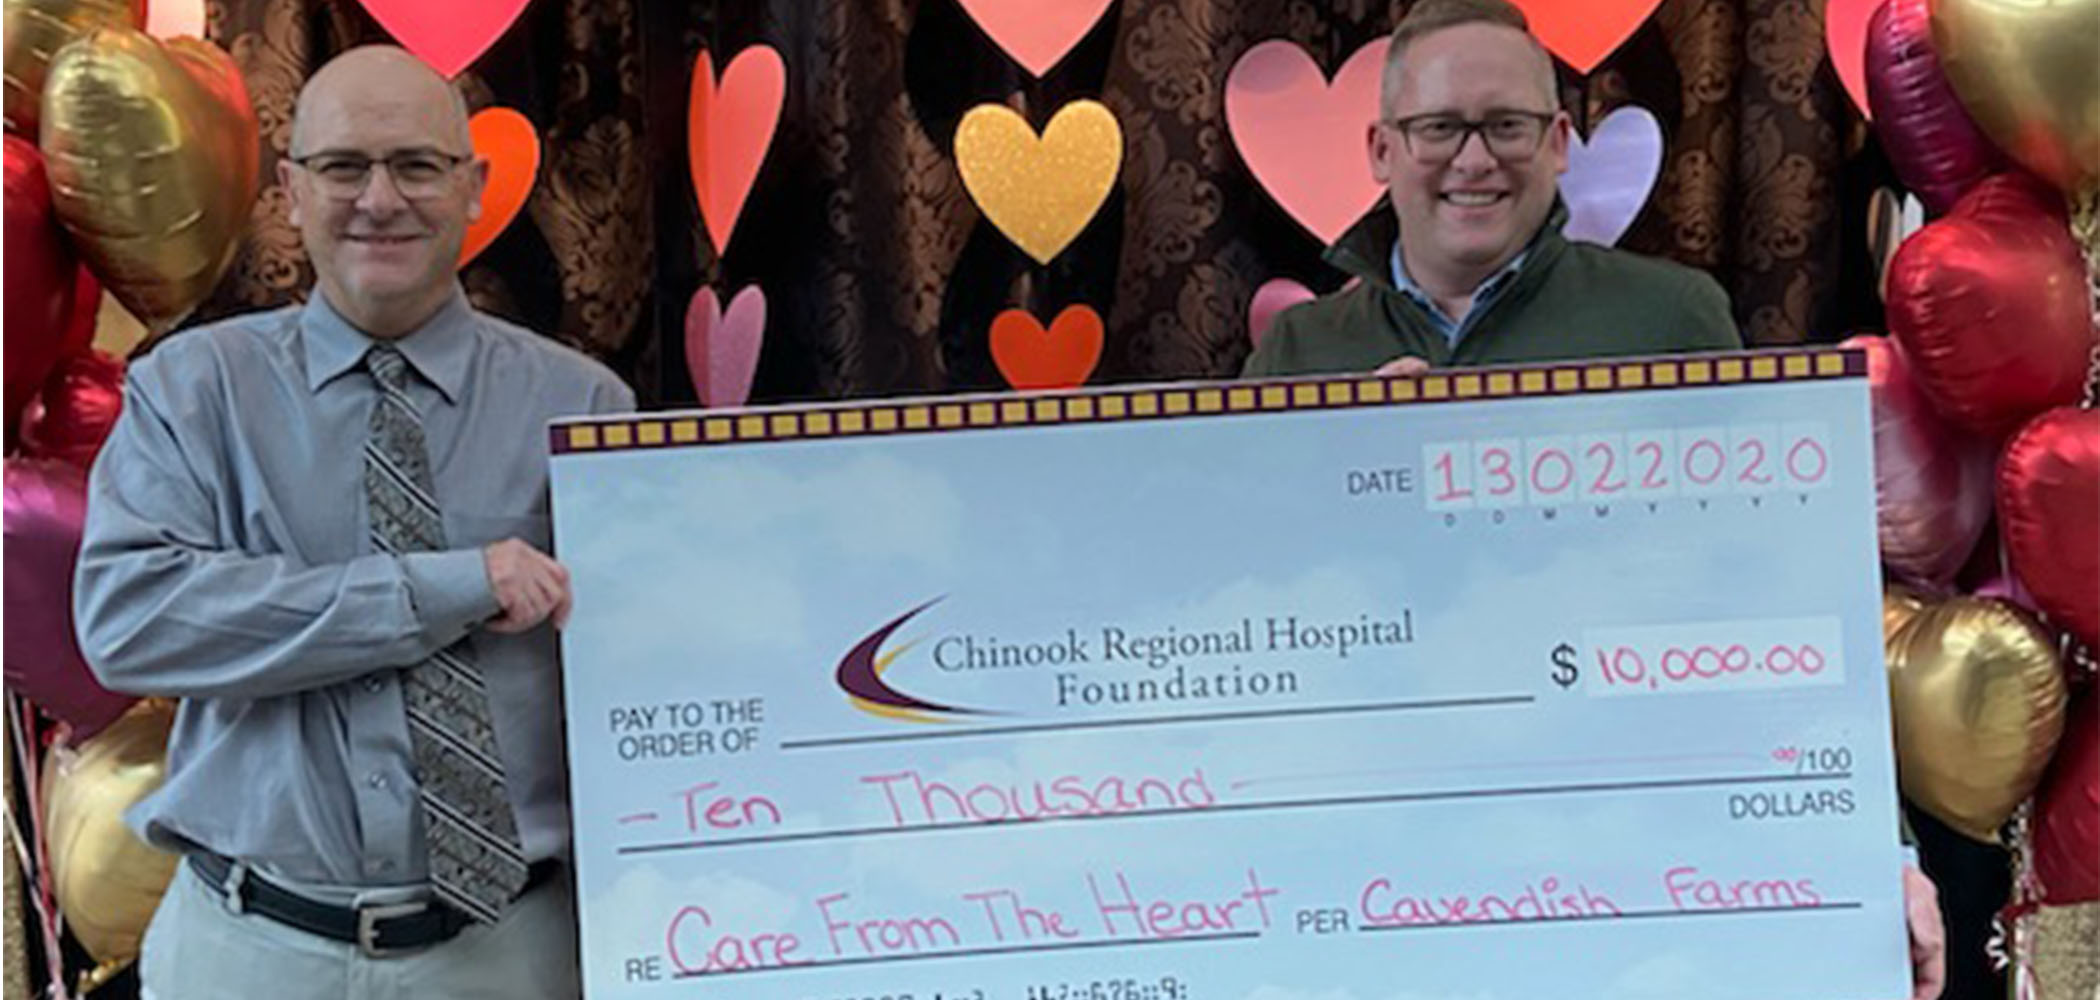 Cavendish Farms contributes $10,000 in support of the expansion of the Chinook Regional Hospital in Lethbridge, Alberta